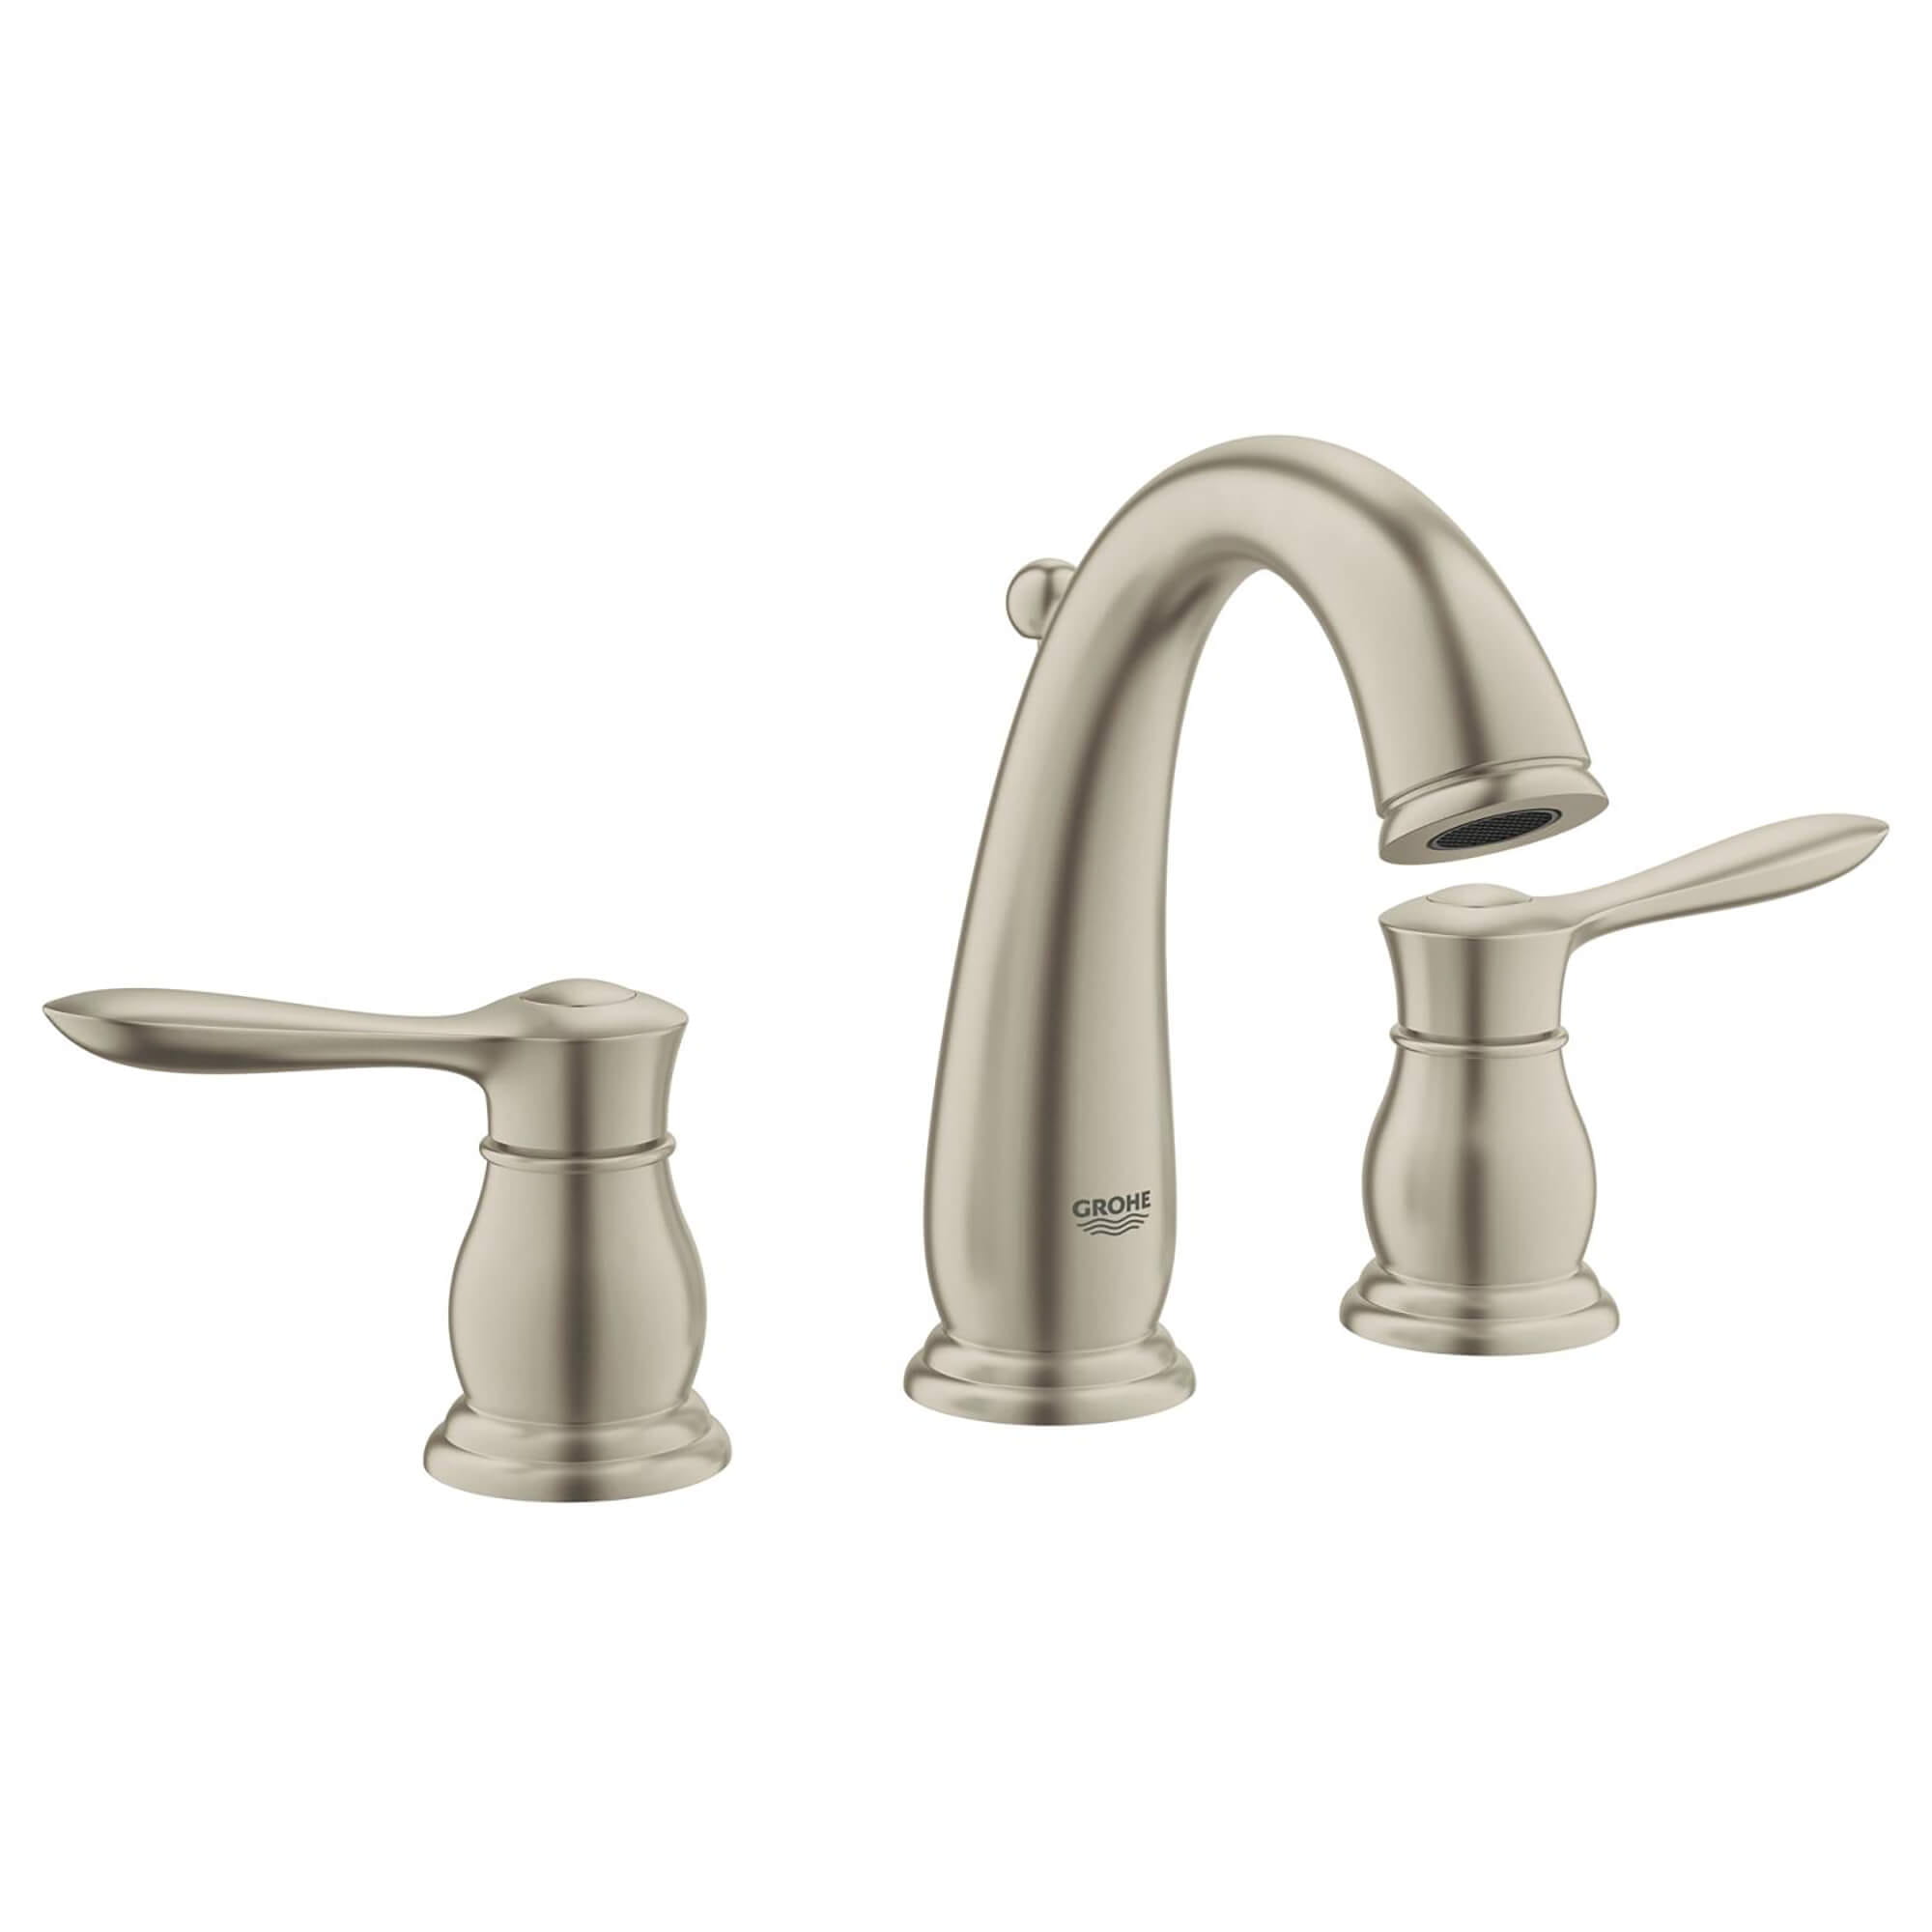 Parkfield 8 in Widespread 2 Handle Bathroom Faucet   12 GPM